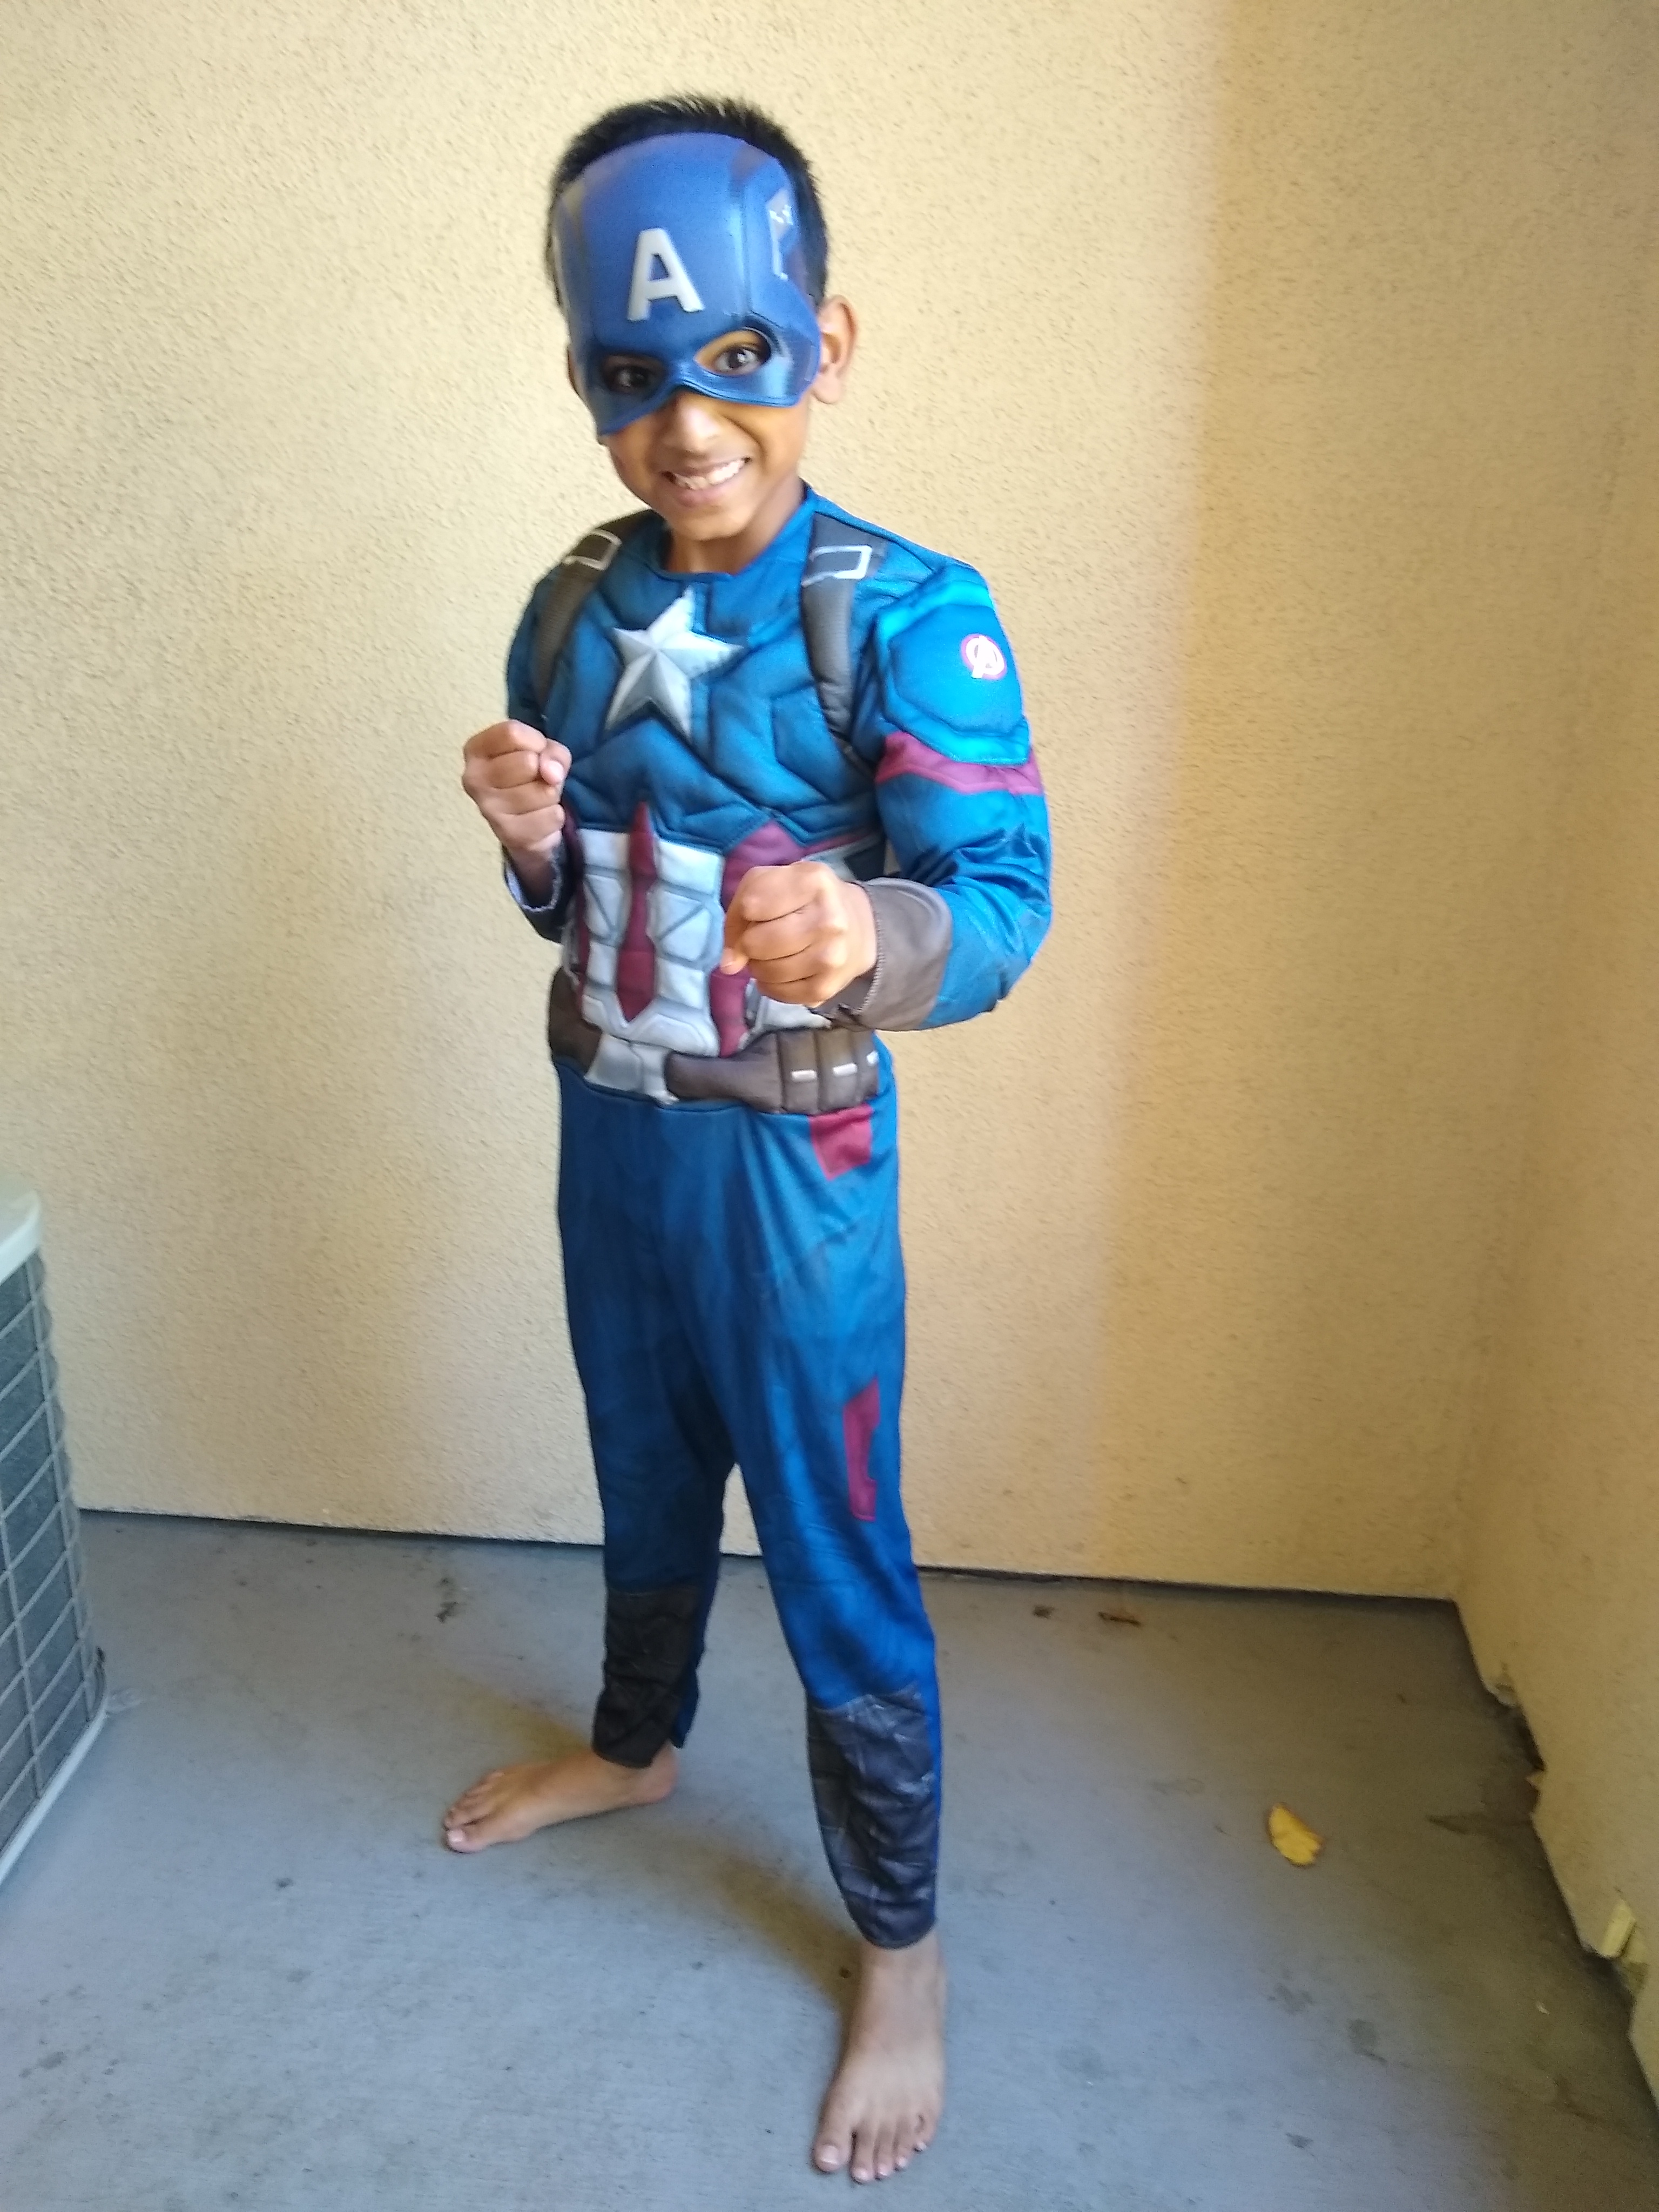 Me dressed up as Captian America